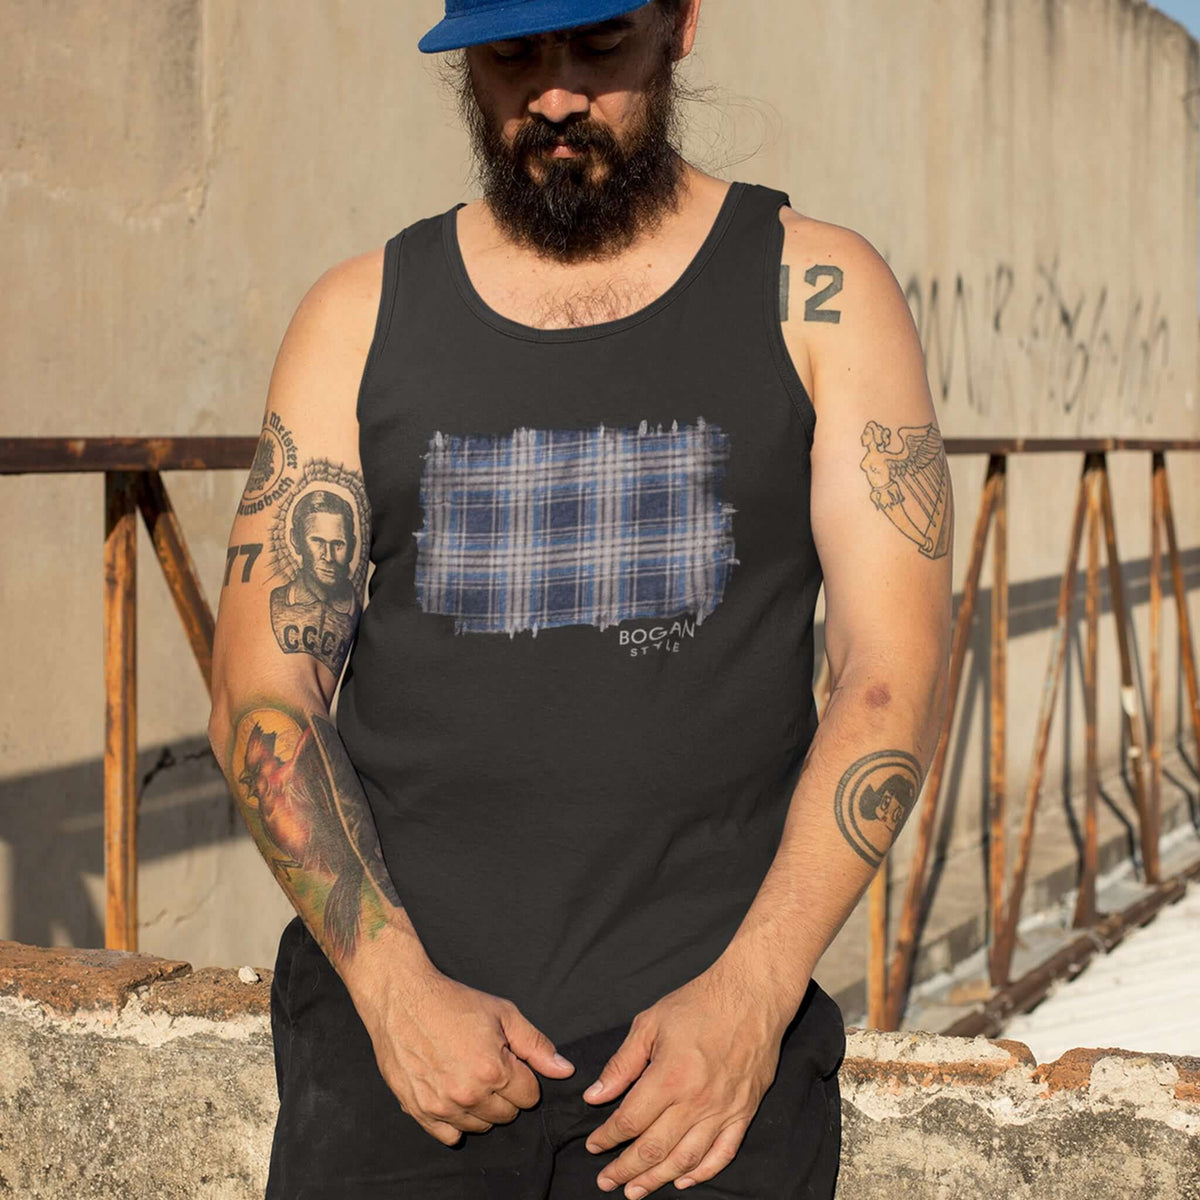 Man with tattoos wearing black tank top with flanno design